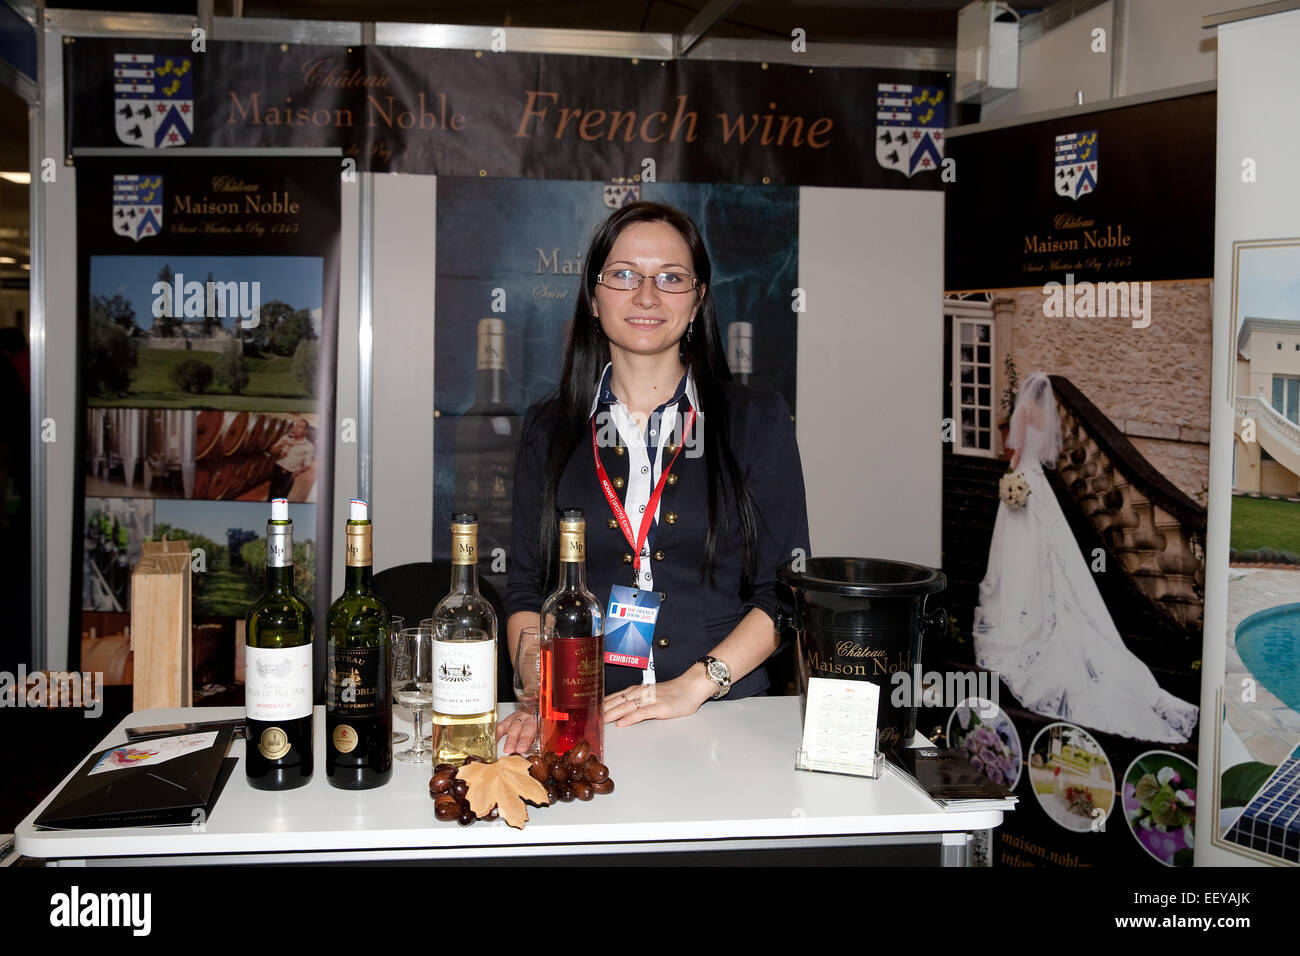 Chateau Maison Noble wines on sale at the France Show 2015 in Olympia London Stock Photo